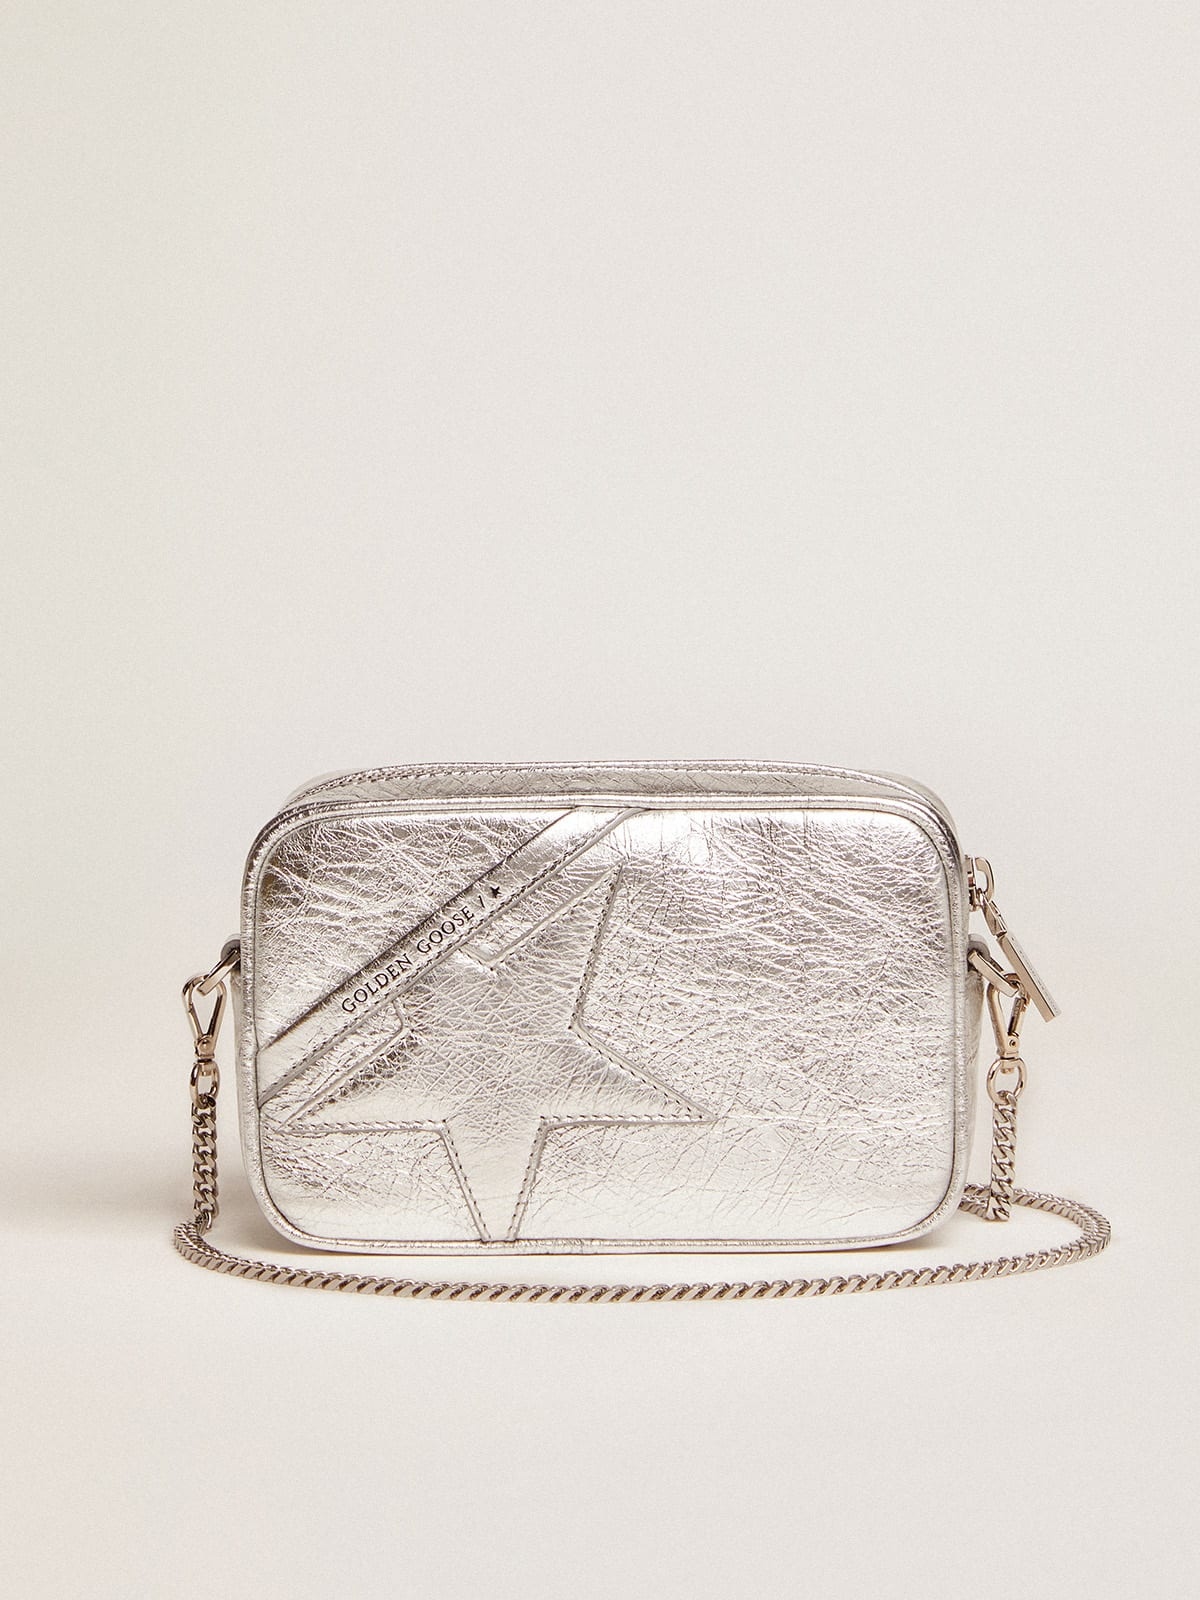 Golden Goose Mini Star Bag in silver laminated leather with tone